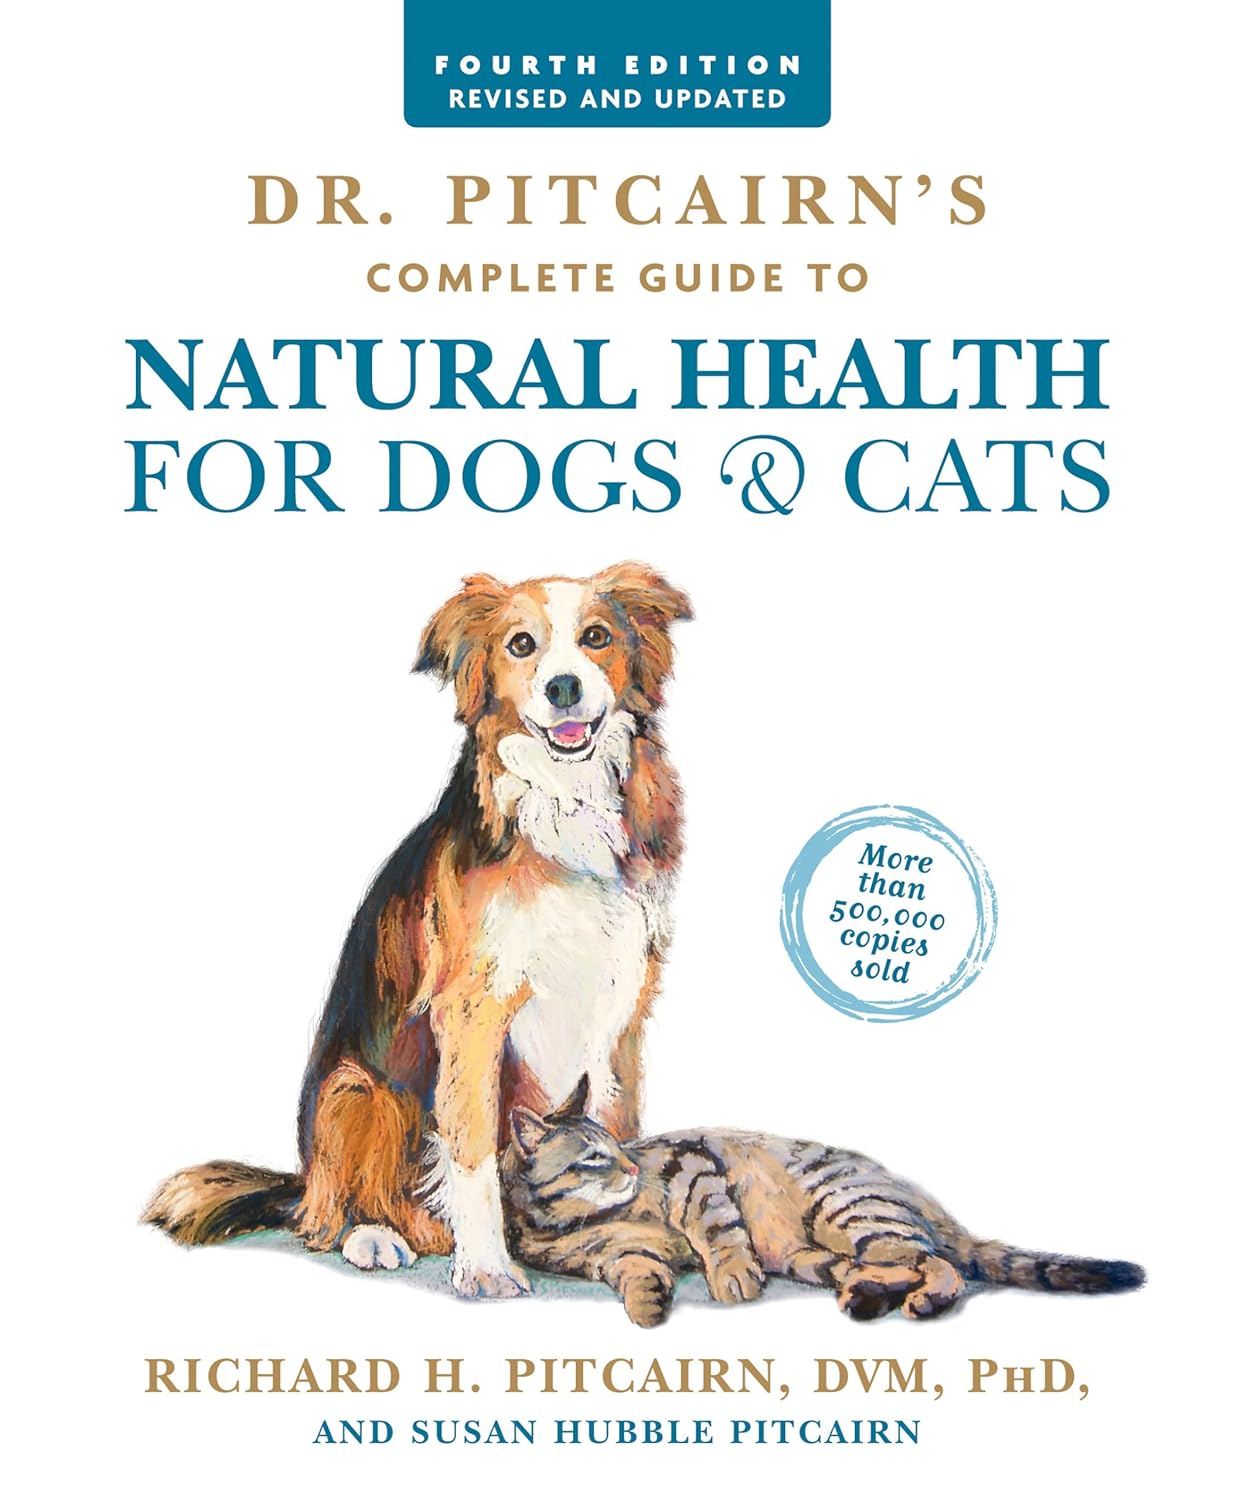 Dr. Pitcairn’s Guide to Health for Cats